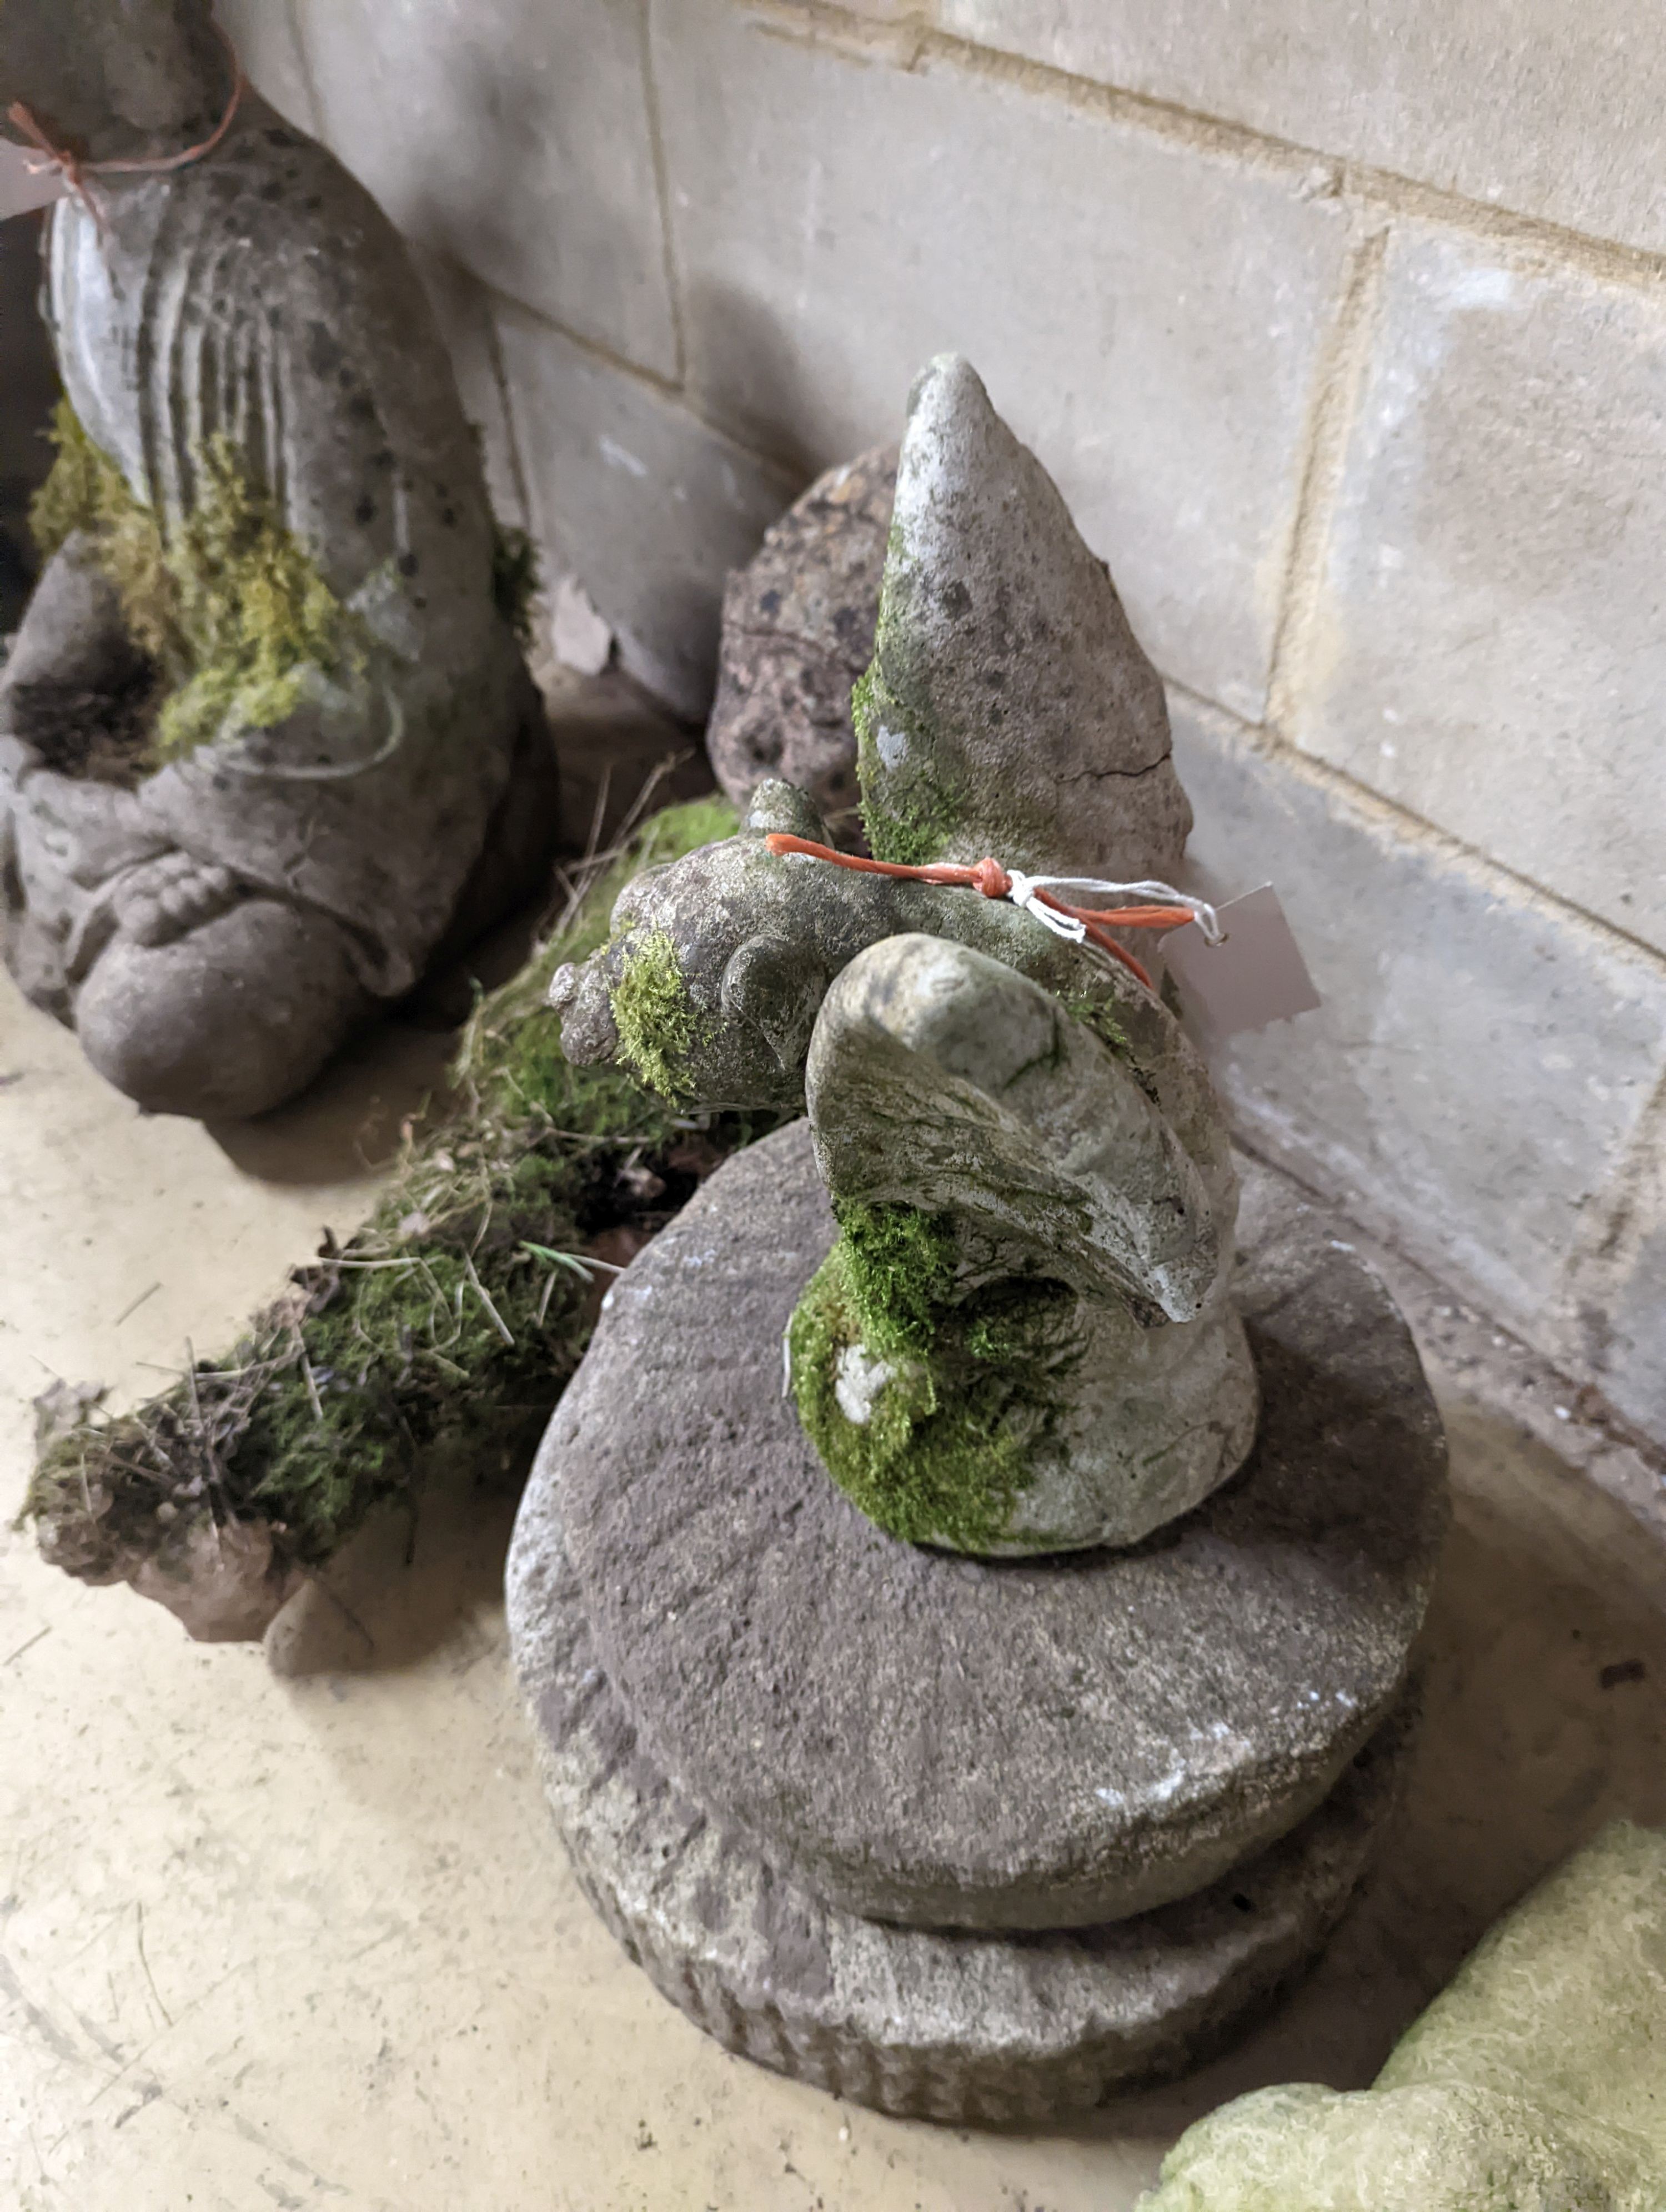 Two small circular mill stones, a reconstituted stone gargoyle and a terracotta reclining pixie garden ornament